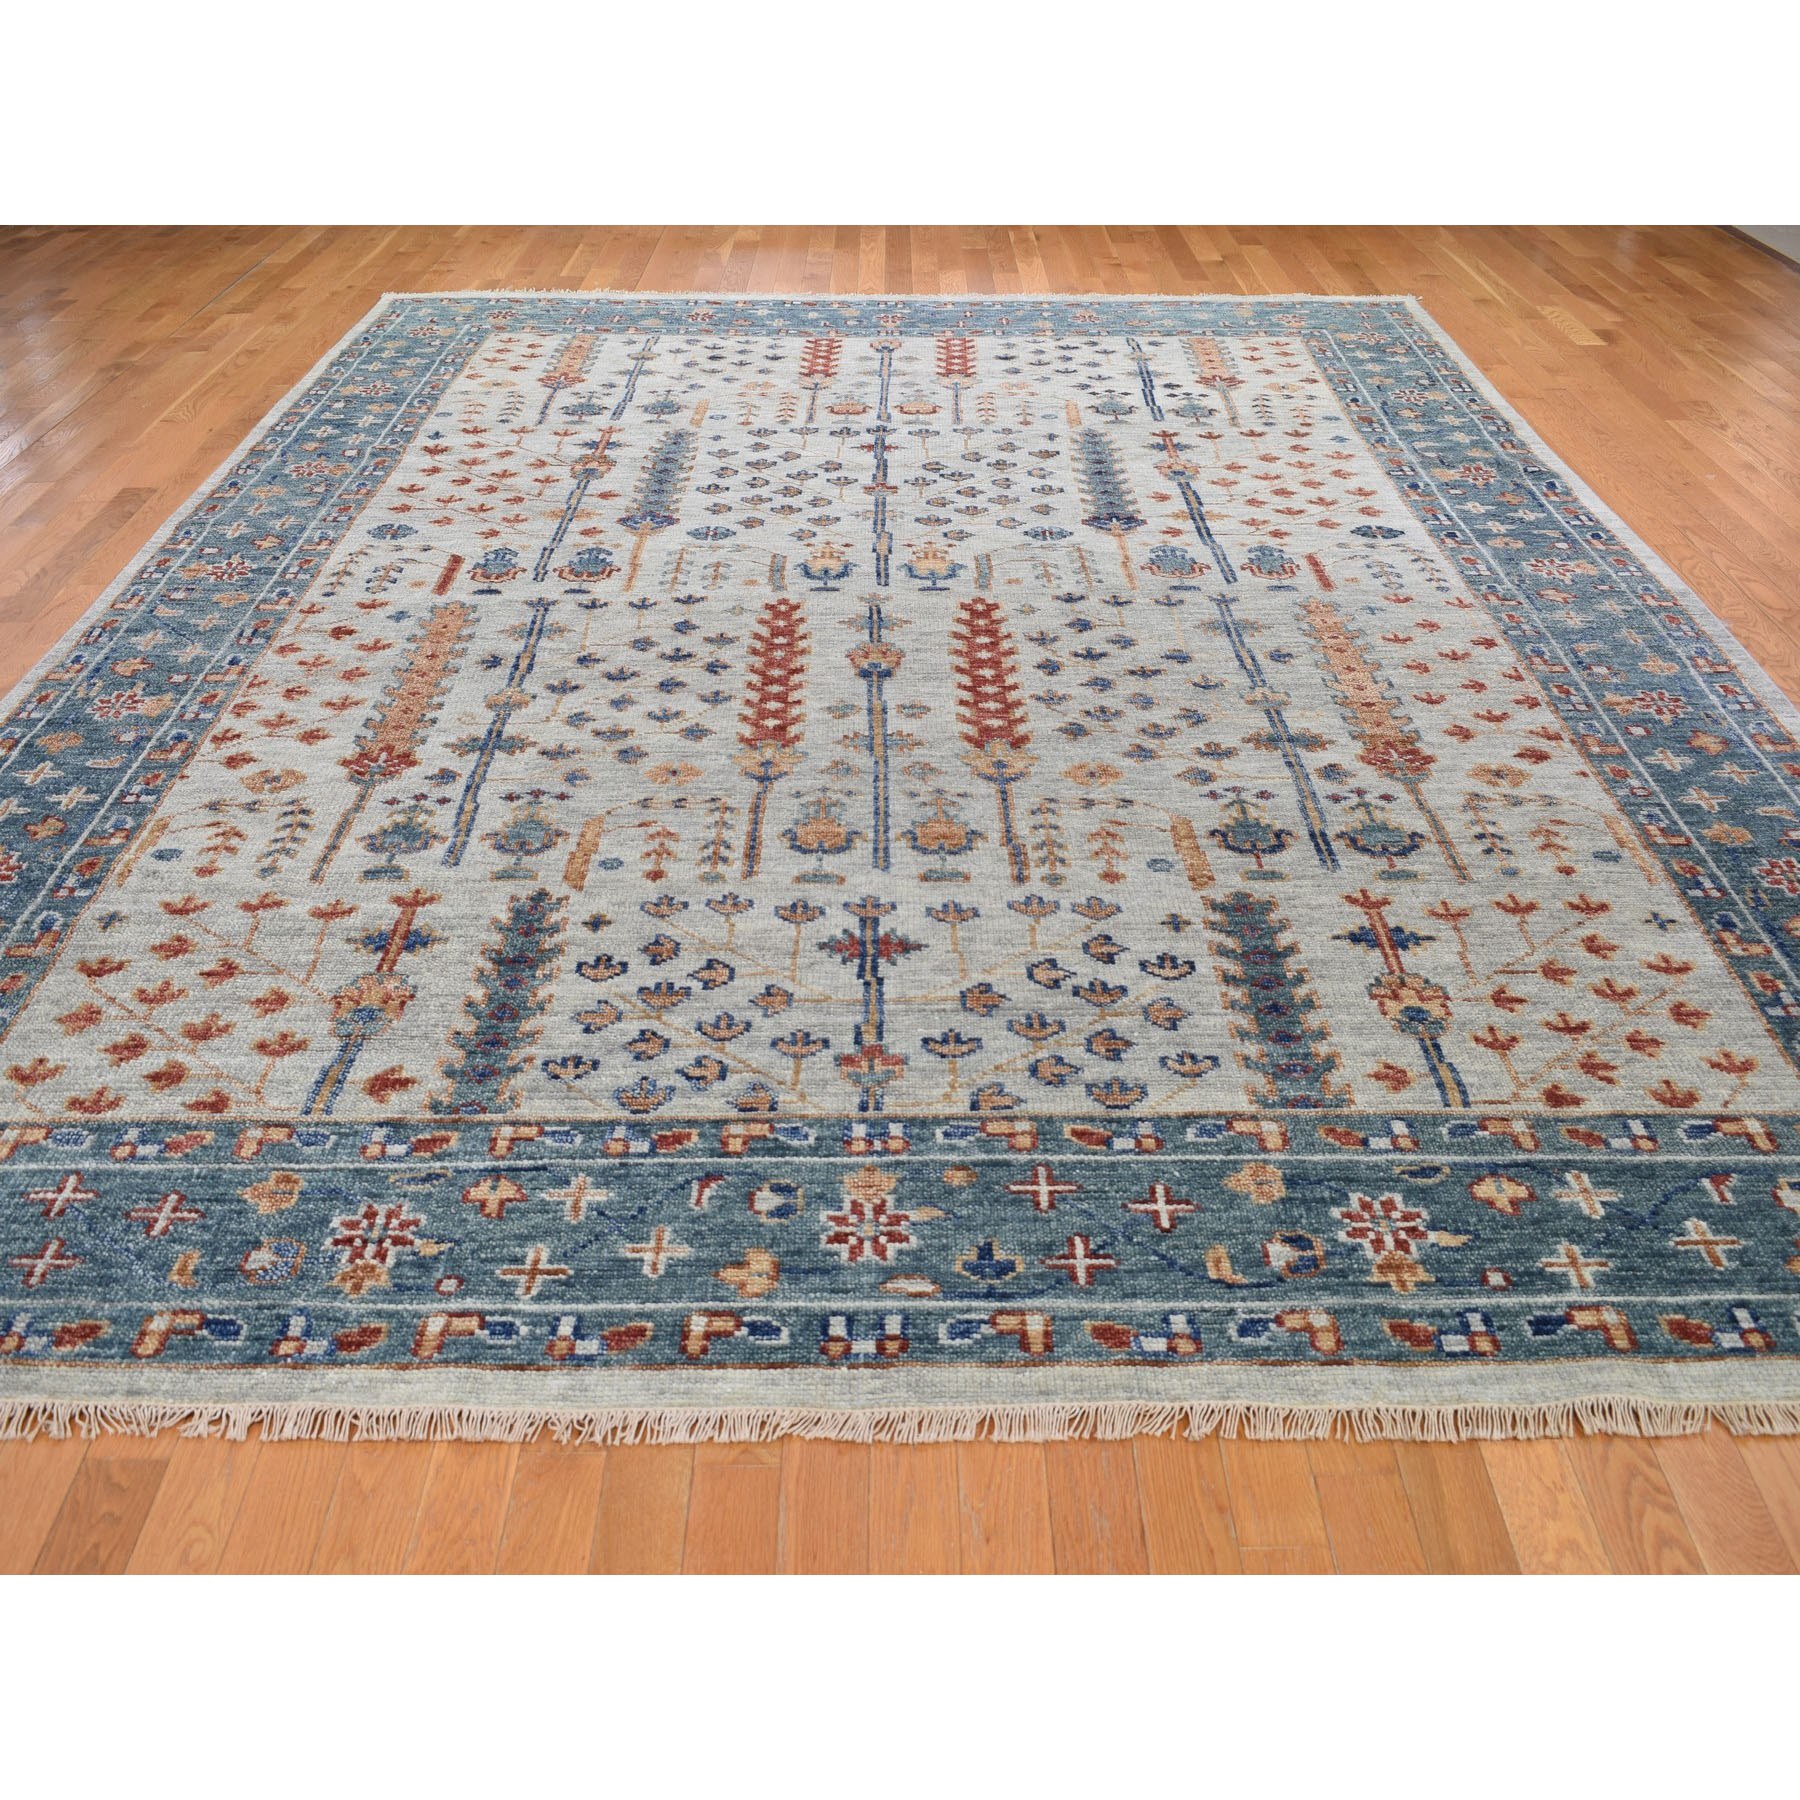 10-x13-10  Supple Collection With Tree Design Soft wool Hand Knotted Oriental Rug 